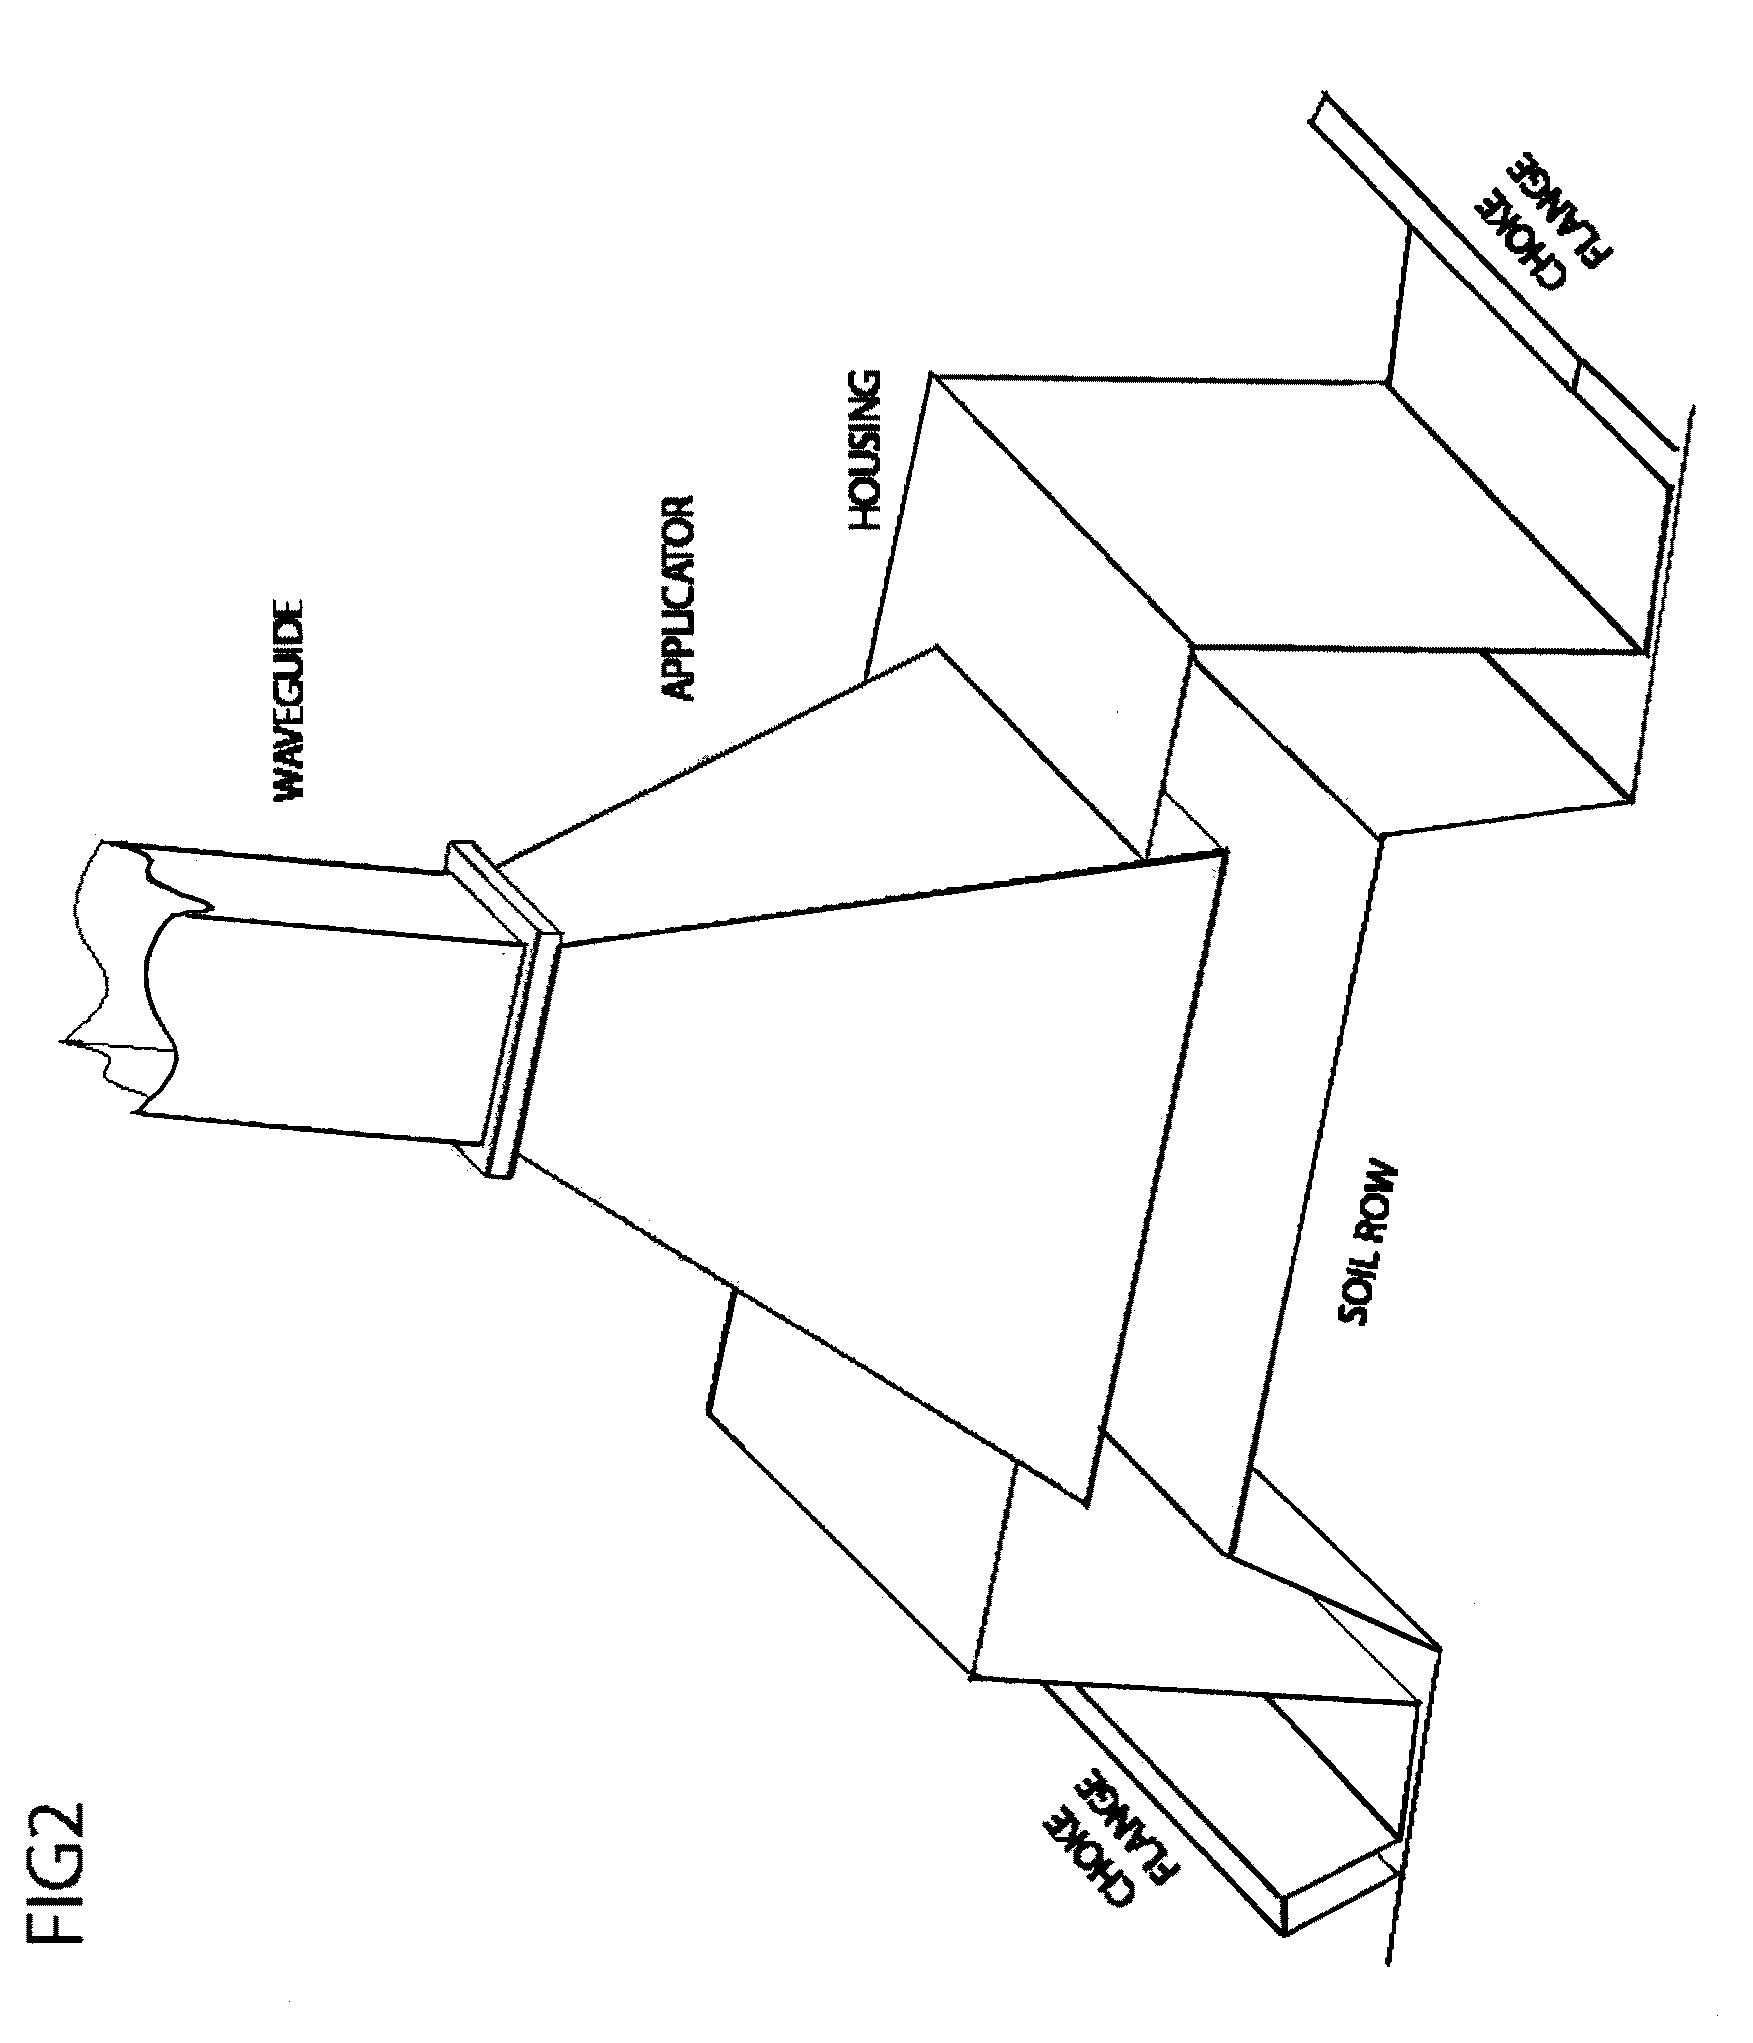 Microwave system and method for controlling the sterilization and infestation of crop soils